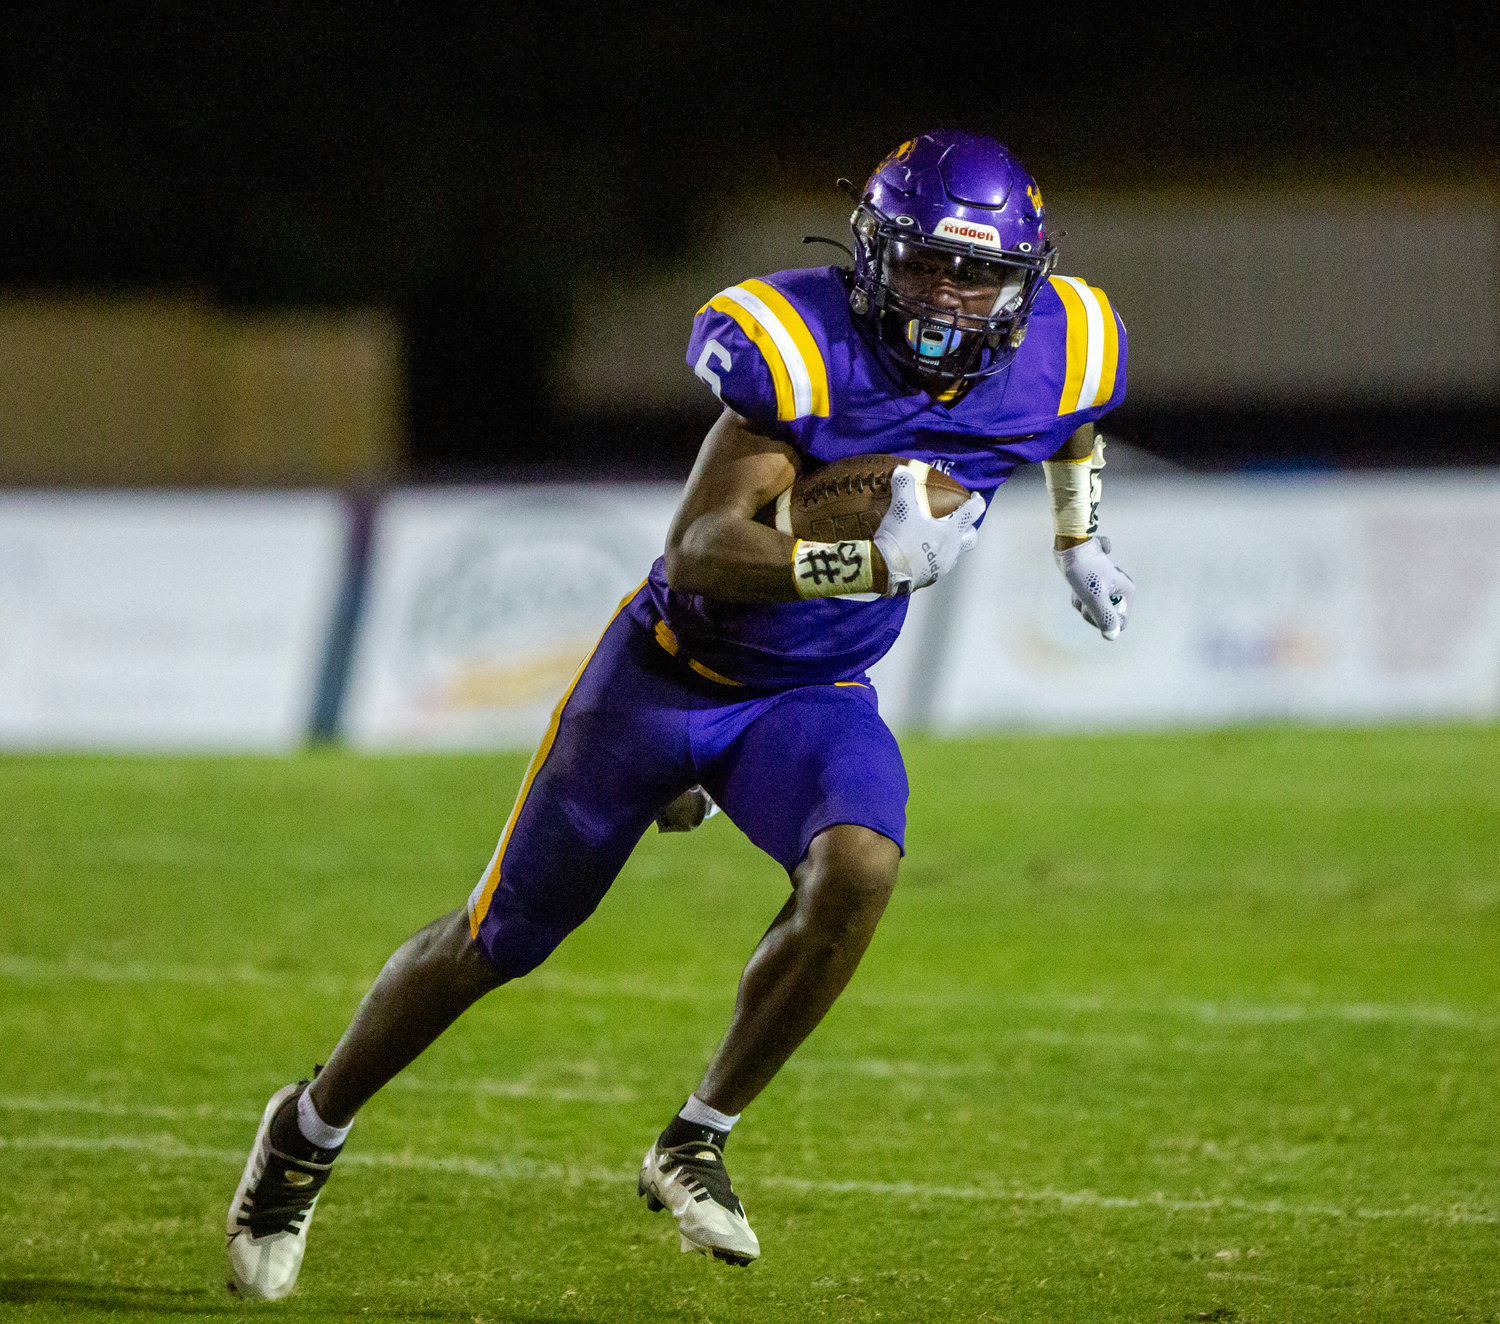 Daphne senior Stephon Blackshear hits the open field after he secured a catch in the first half of the Trojans’ region game against Davidson Friday night at home. Blackshear scored on a rushing touchdown in the second half to help Daphne win 40-21.